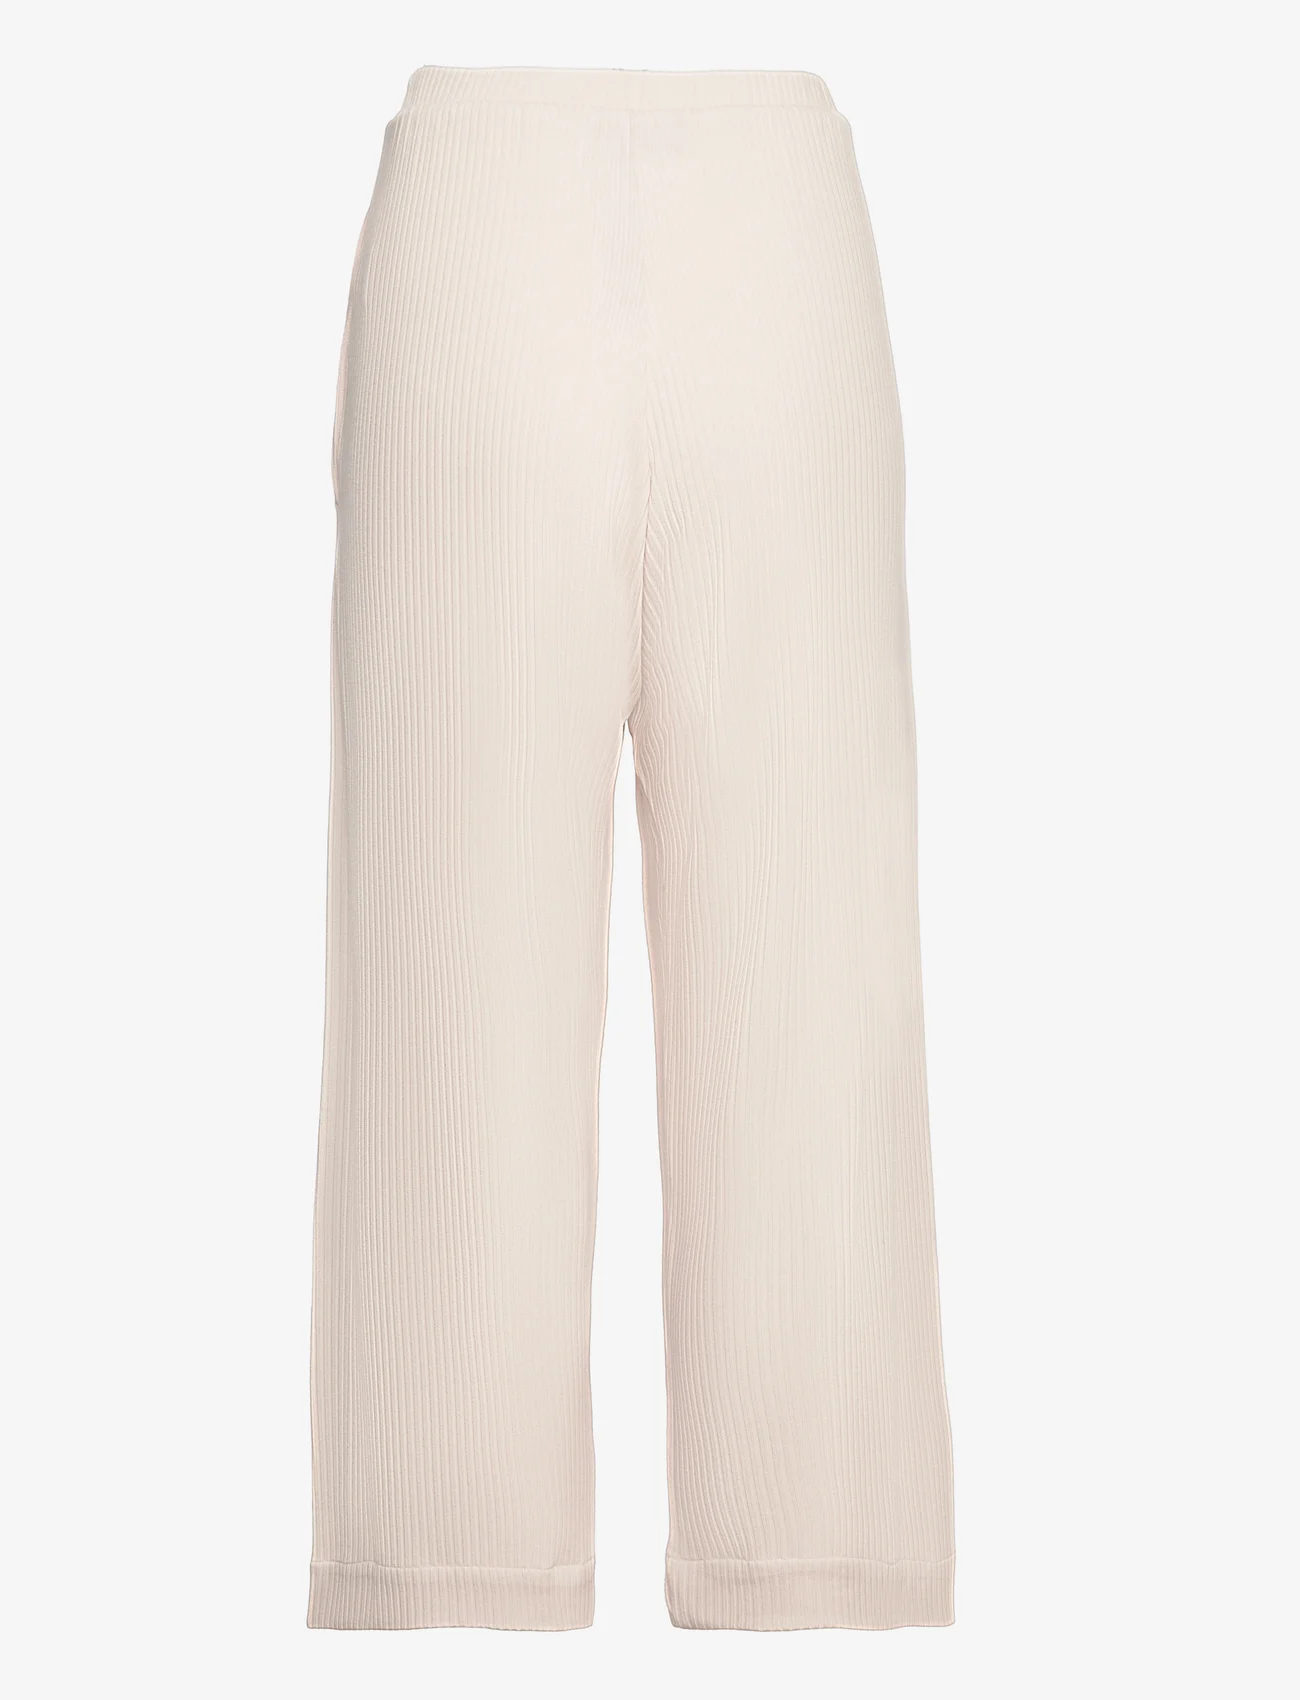 A Part Of The Art - AIRY PANTS - joggers - ivory - 1